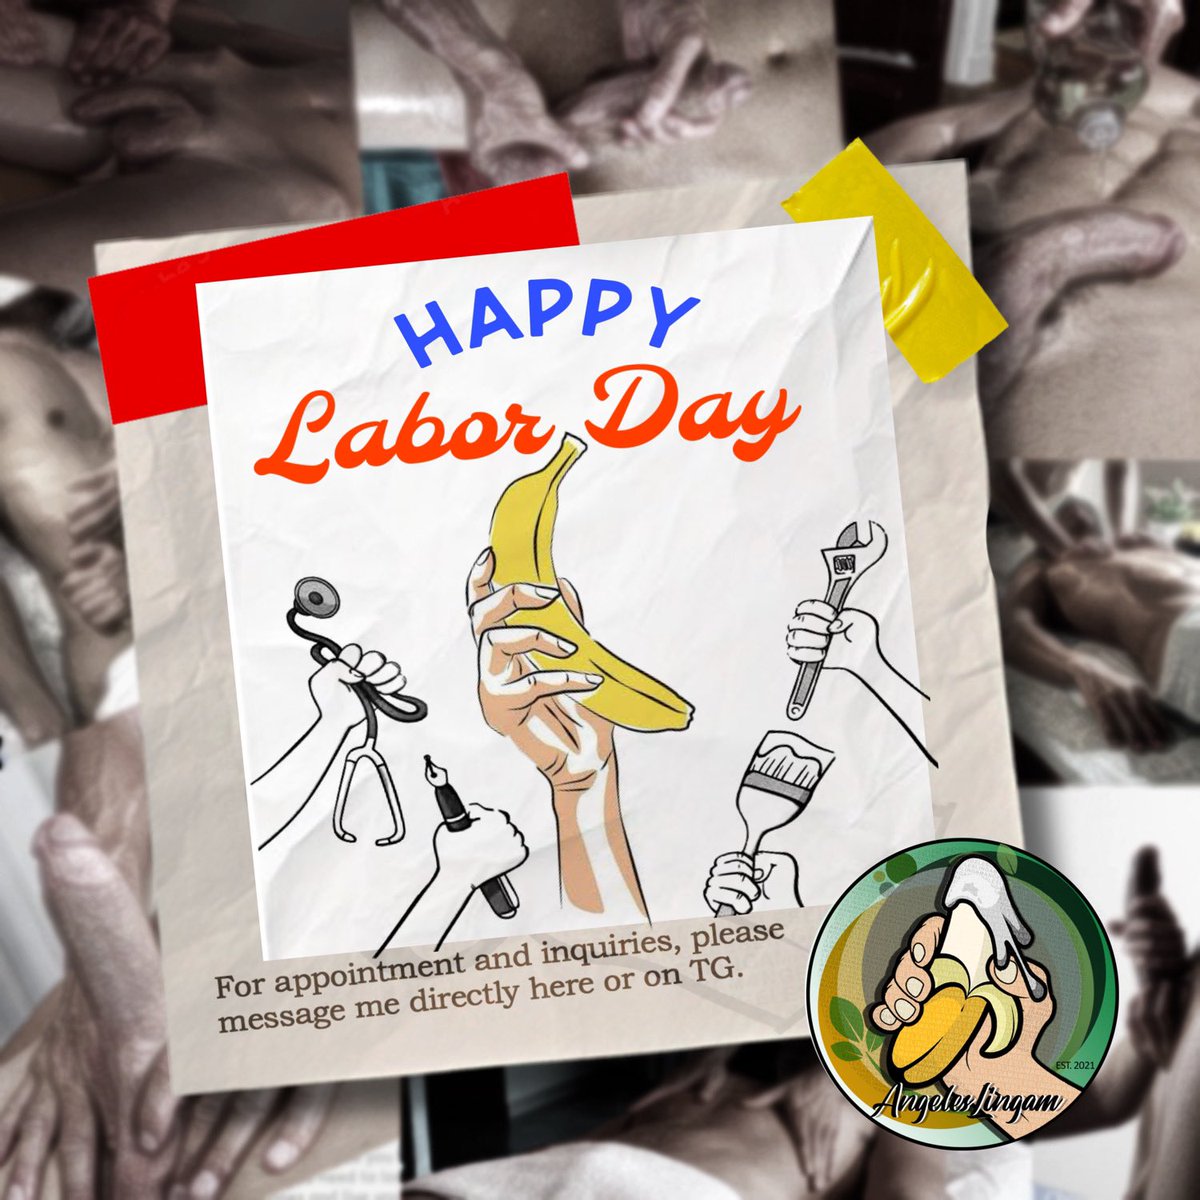 Cheers to all hardworking souls this Labor Day! Treat yourself to a ultimate lingam massage and embrace the relaxation you deserve.

Book now and get a chance to have 25-50% off

#LaborDayAppreciation #PamperYourself #Lingam #AlterAngels #Jakolph